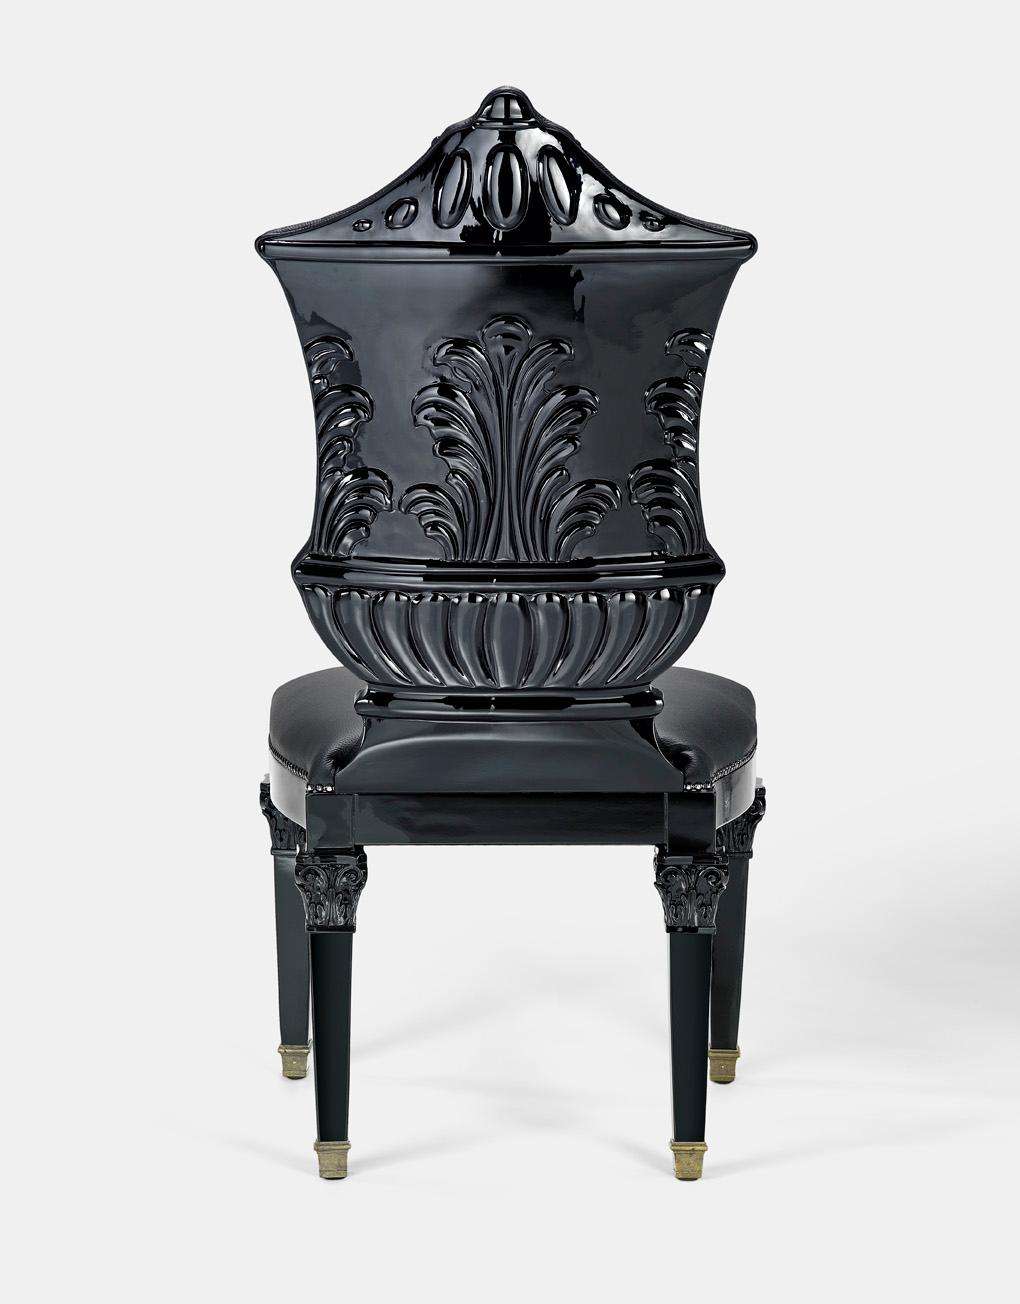 Italian Chair Carved Solidwood Black Lacquer Finish Dakened Feet Black Caps Leather For Sale